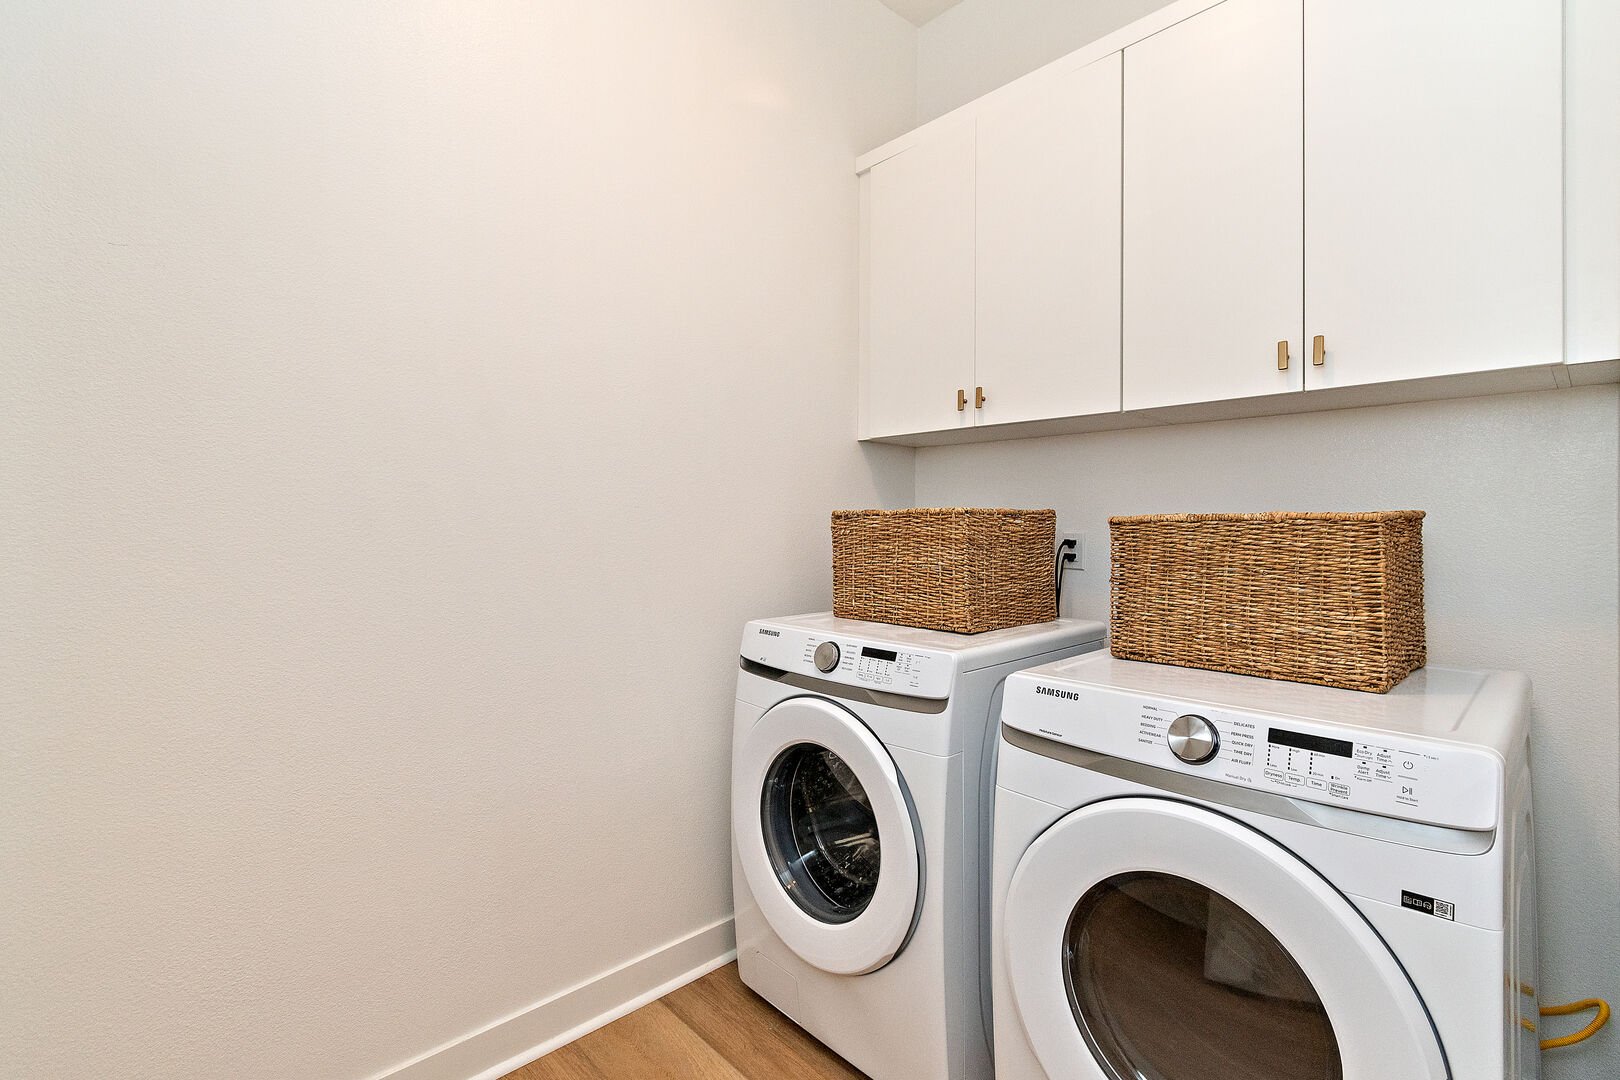 Palmer Retreat is fully equipped with a laundry room! It includes a washer, dryer, and sink so you may go home with clean clothes.